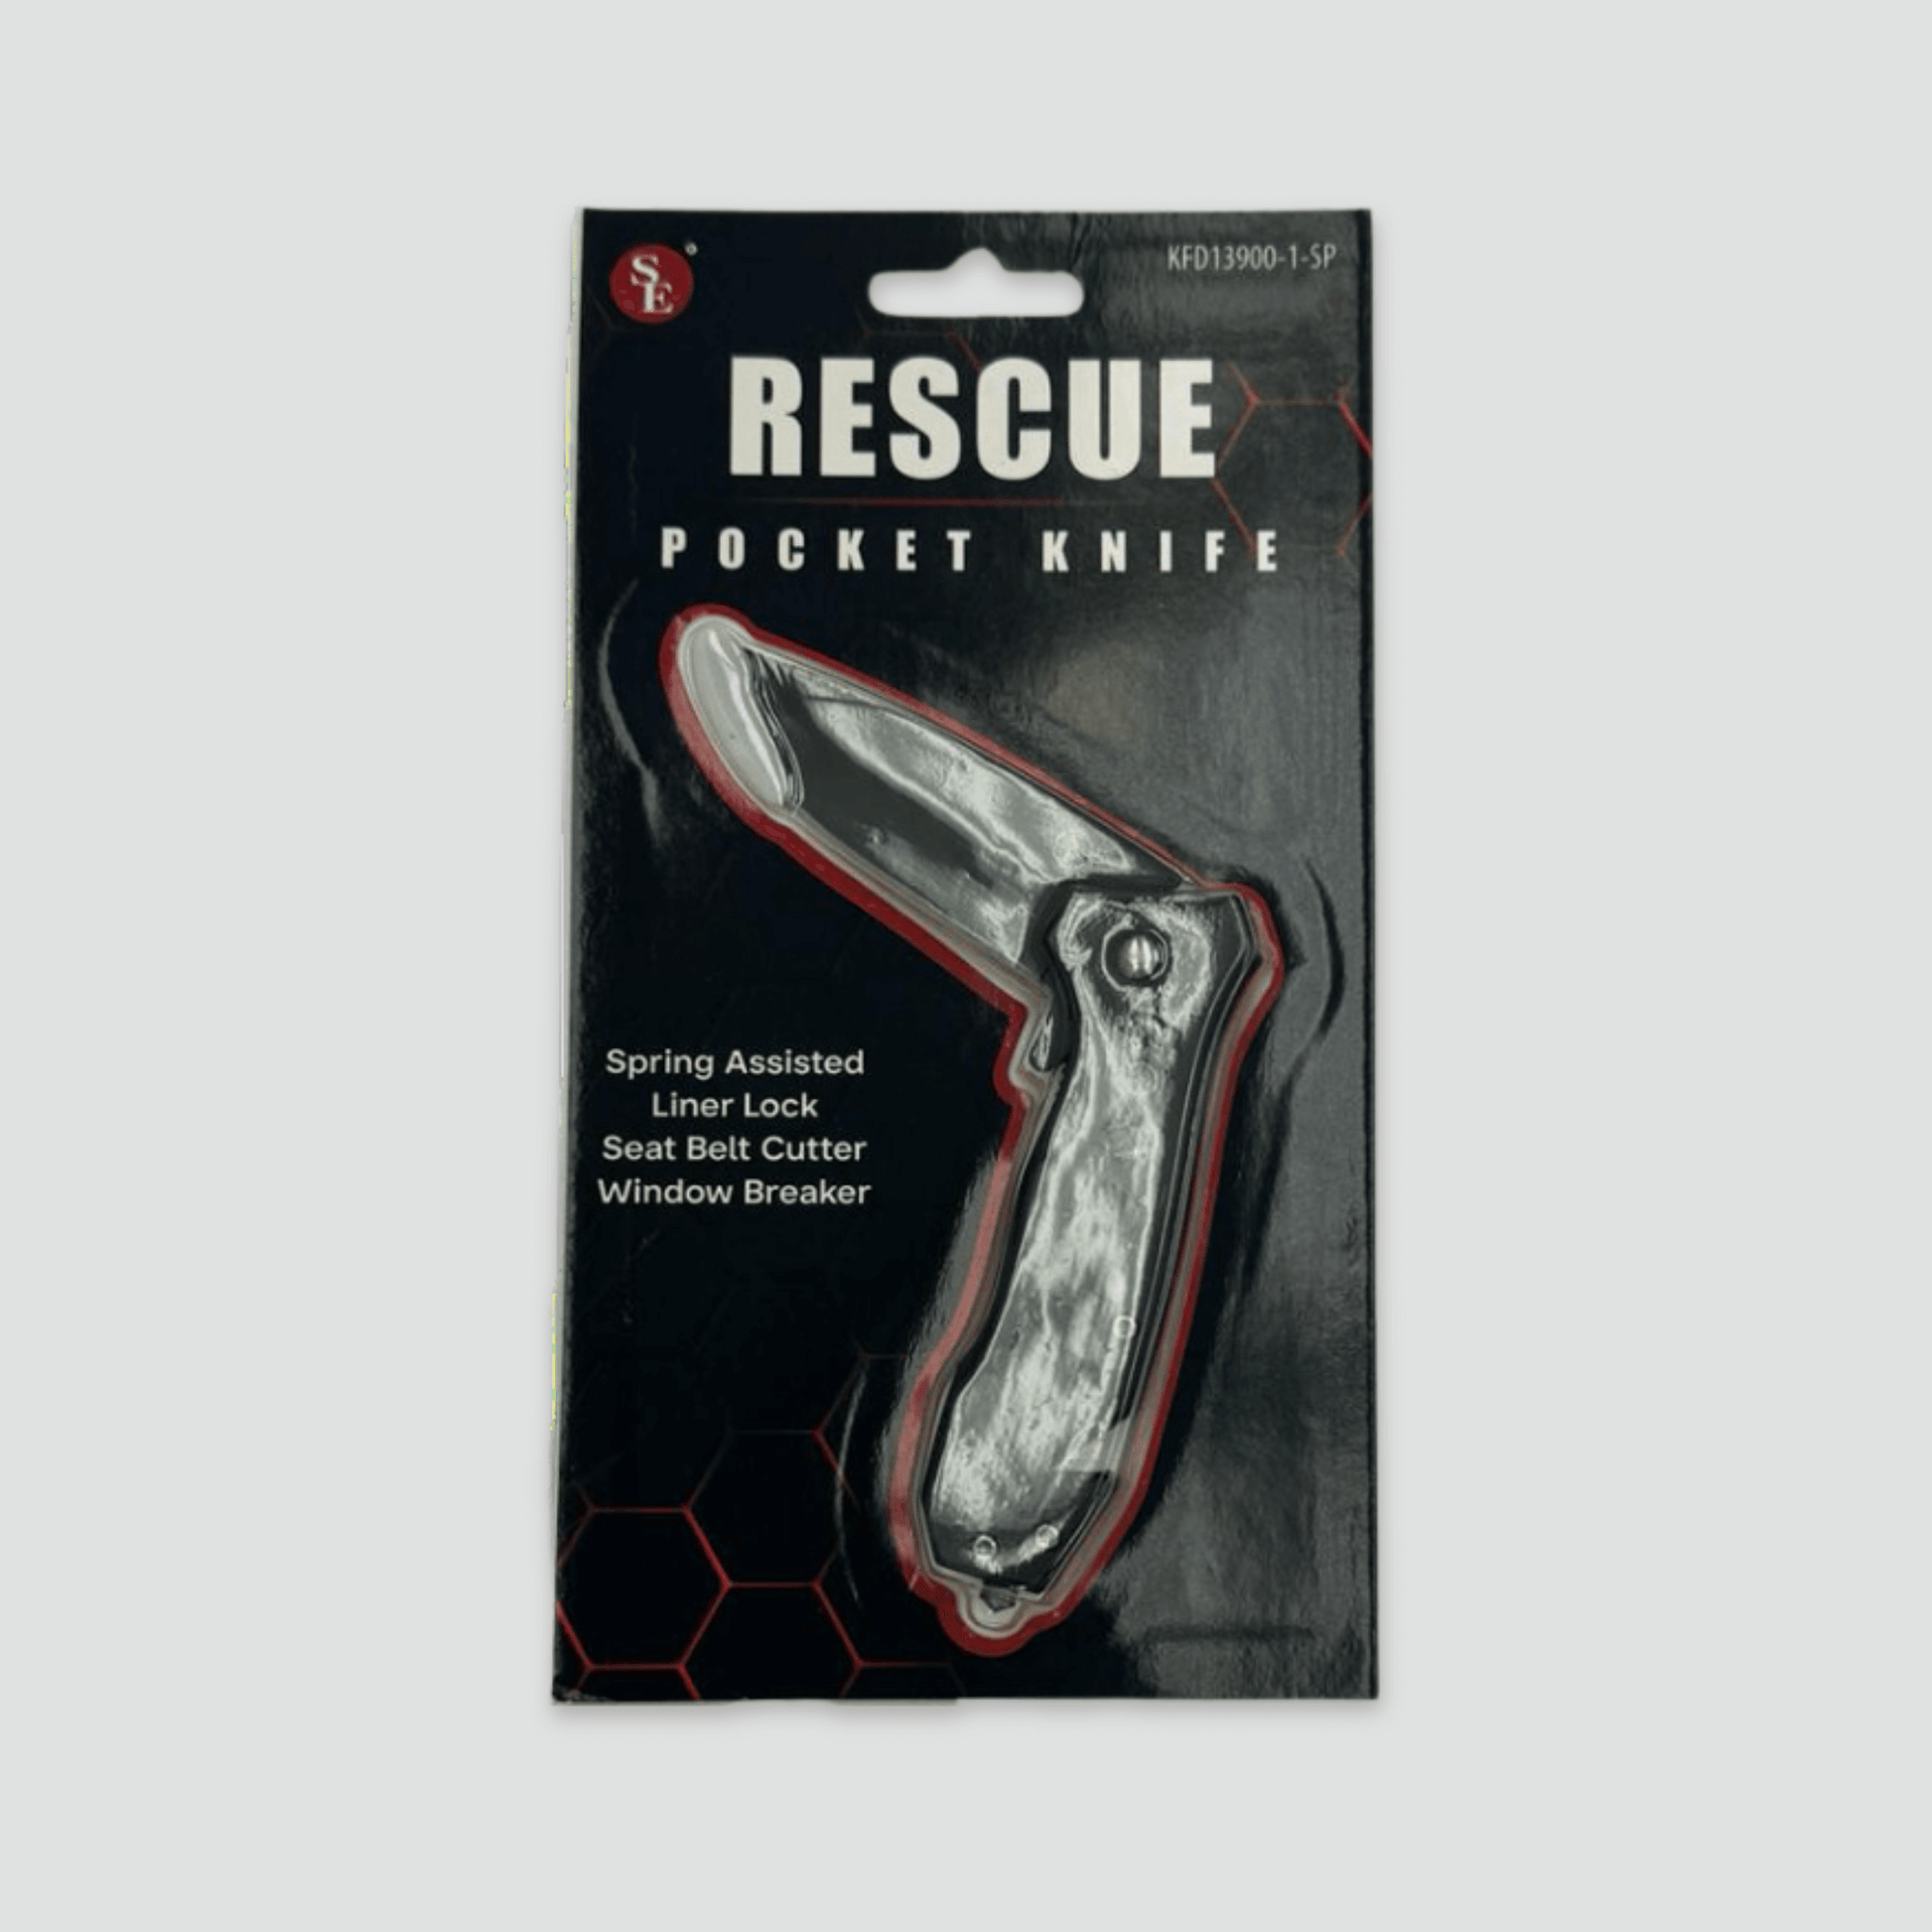 Rescue Pocket Knife complete with window breaker and seatbelt cutter in package. 